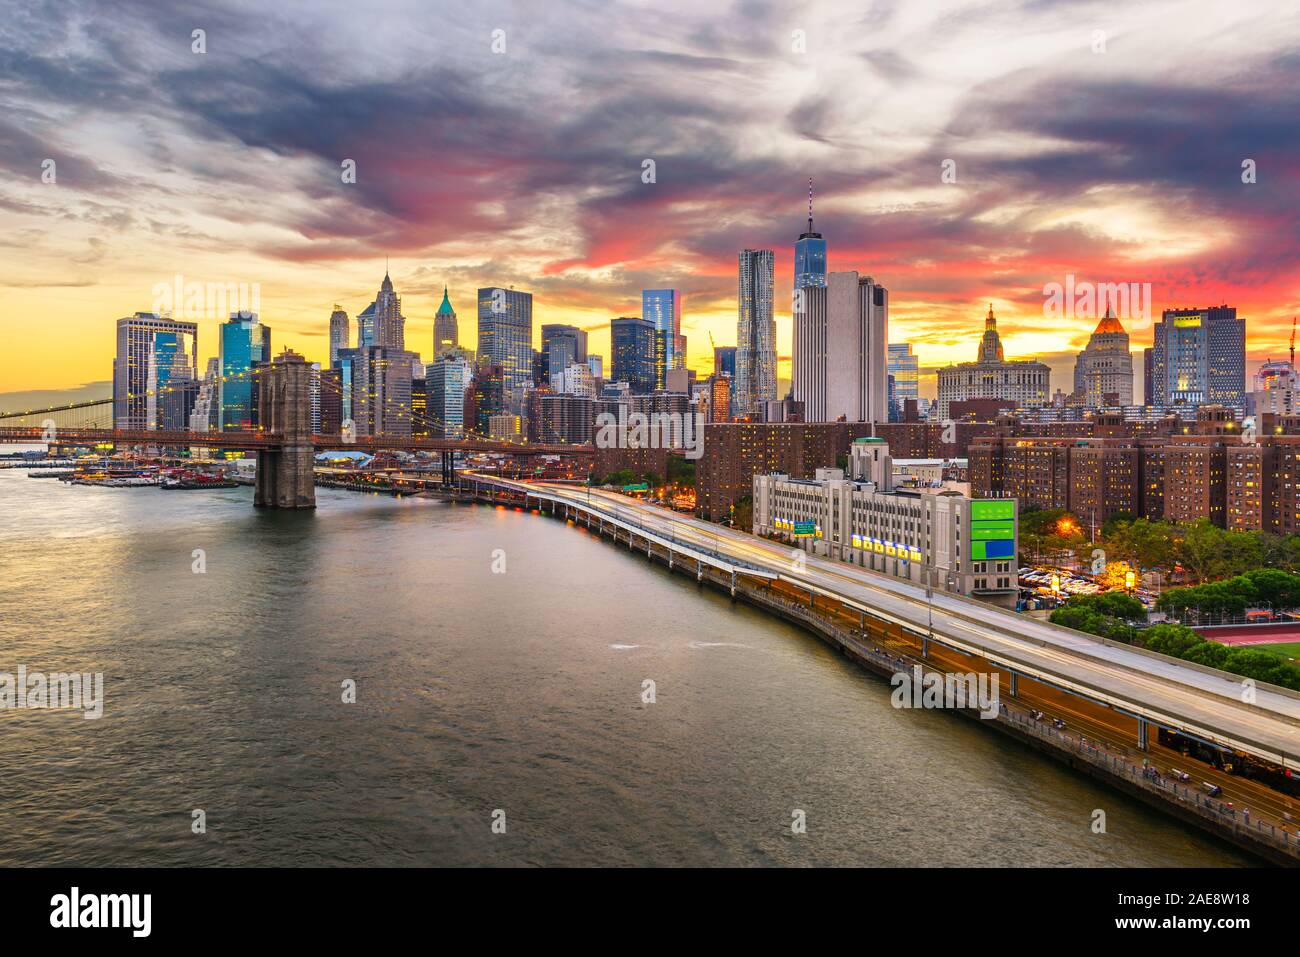 New York, New York, USA downtown Manhattan city skyline over the East River with the Brooklyn Bridge at dusk. Stock Photo